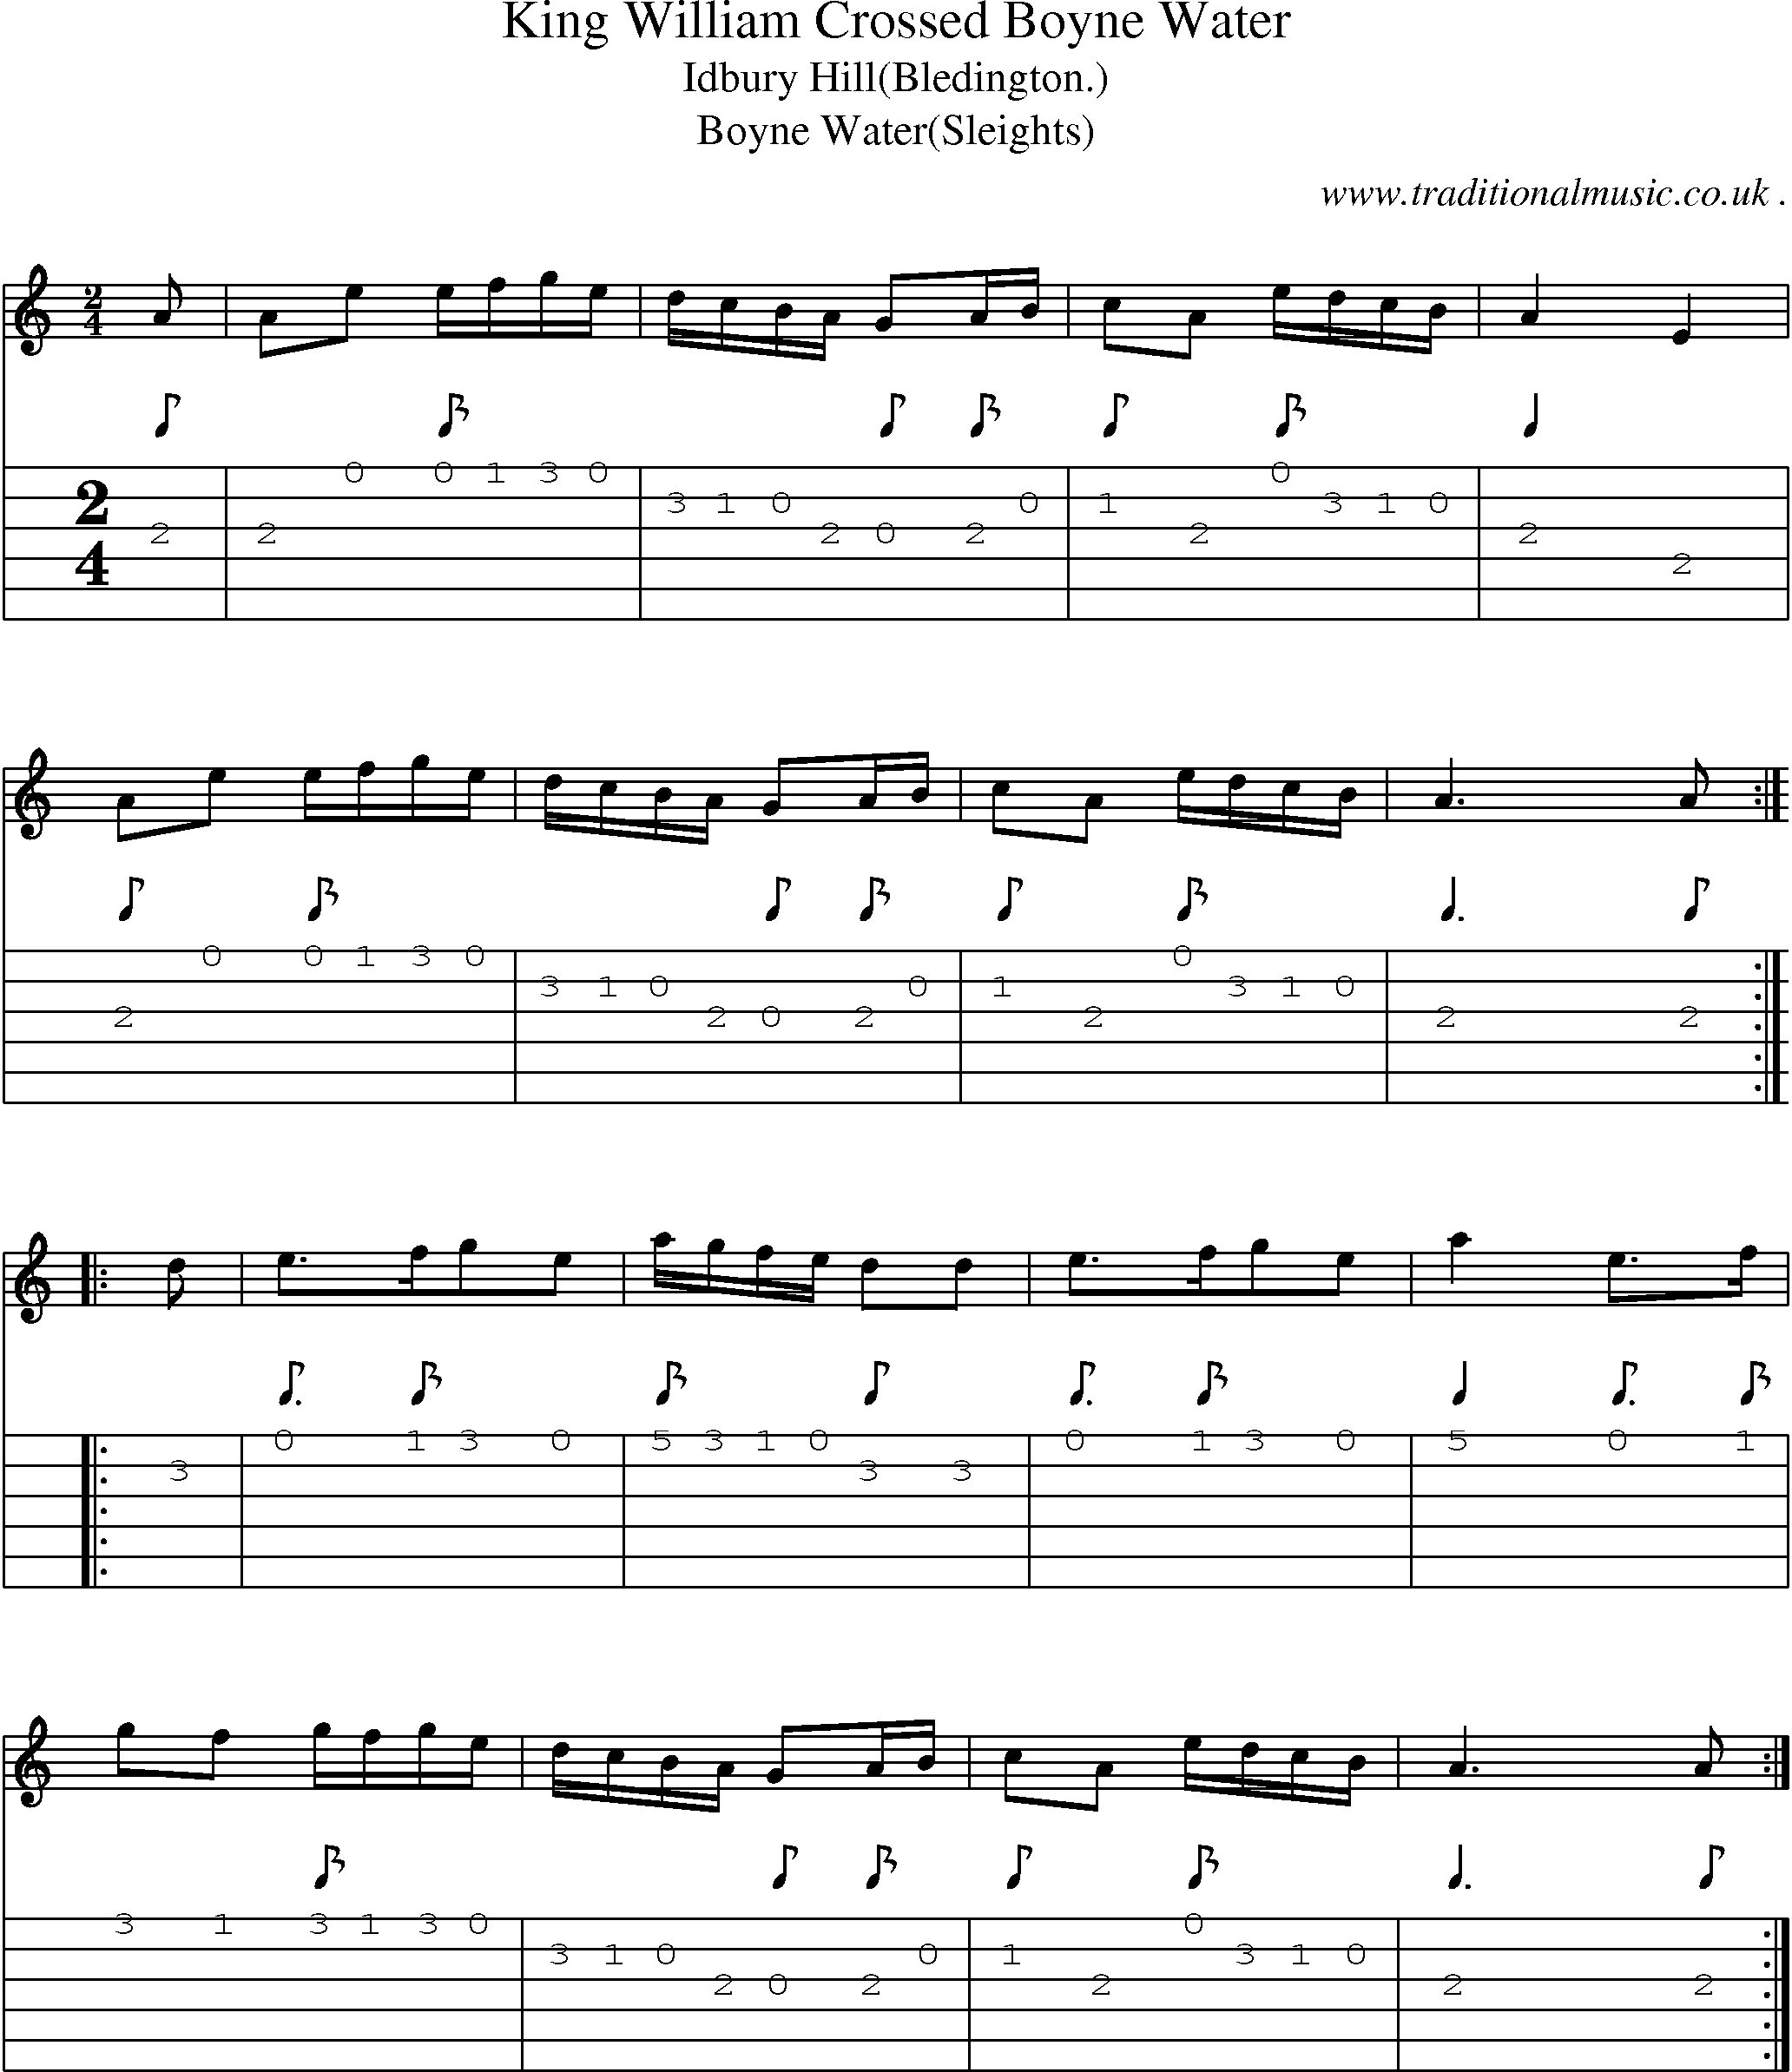 Sheet-Music and Guitar Tabs for King William Crossed Boyne Water